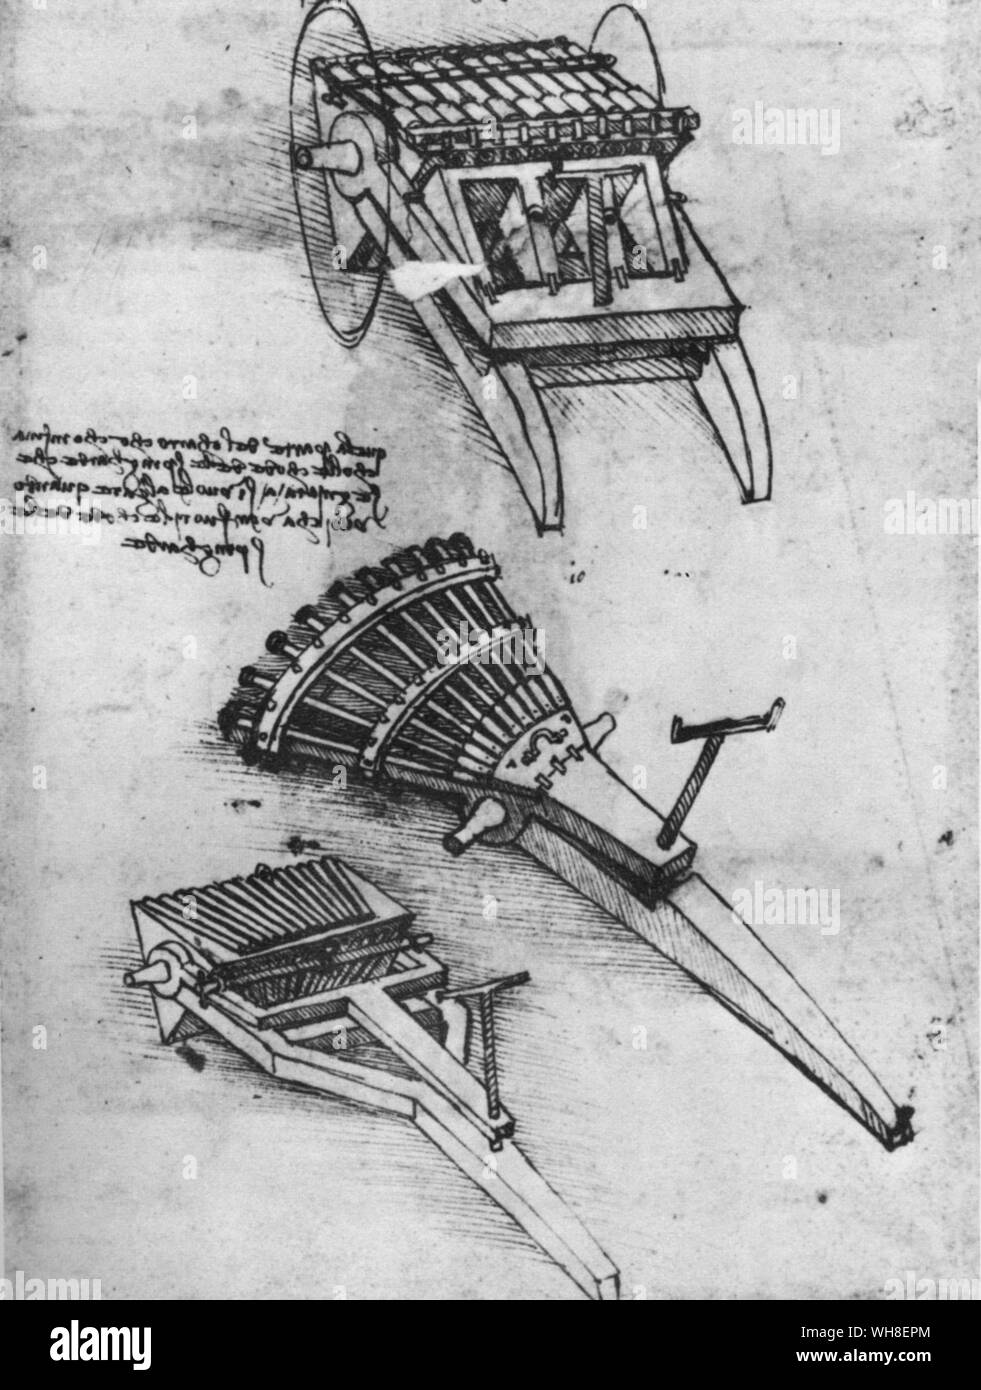 Leonardo's machine guns. Top diagram shows how the barrels in one rack could be discharged, while the gunners were loading the second rack to be rotated presently into the firing position. The third rack would come up to be charged while the first was cooling off. Leonardo da Vinci (1452-1519) was an Italian Renaissance architect, musician, anatomist, inventor, engineer, sculptor, geometer and artist. . . Stock Photo